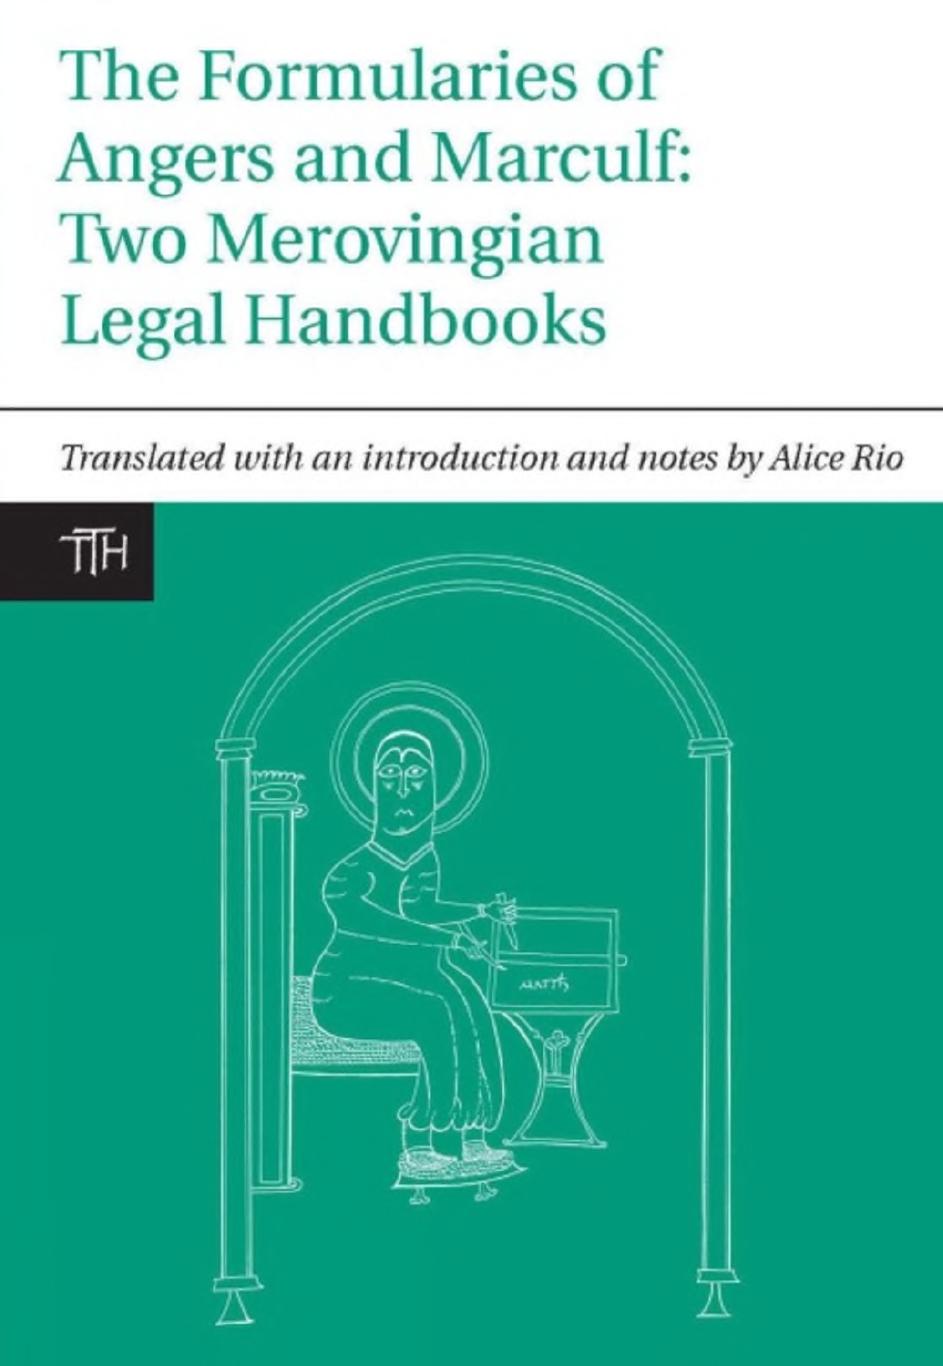 The Formularies of Angers and Marculf: Two Merovingian Legal Handbooks